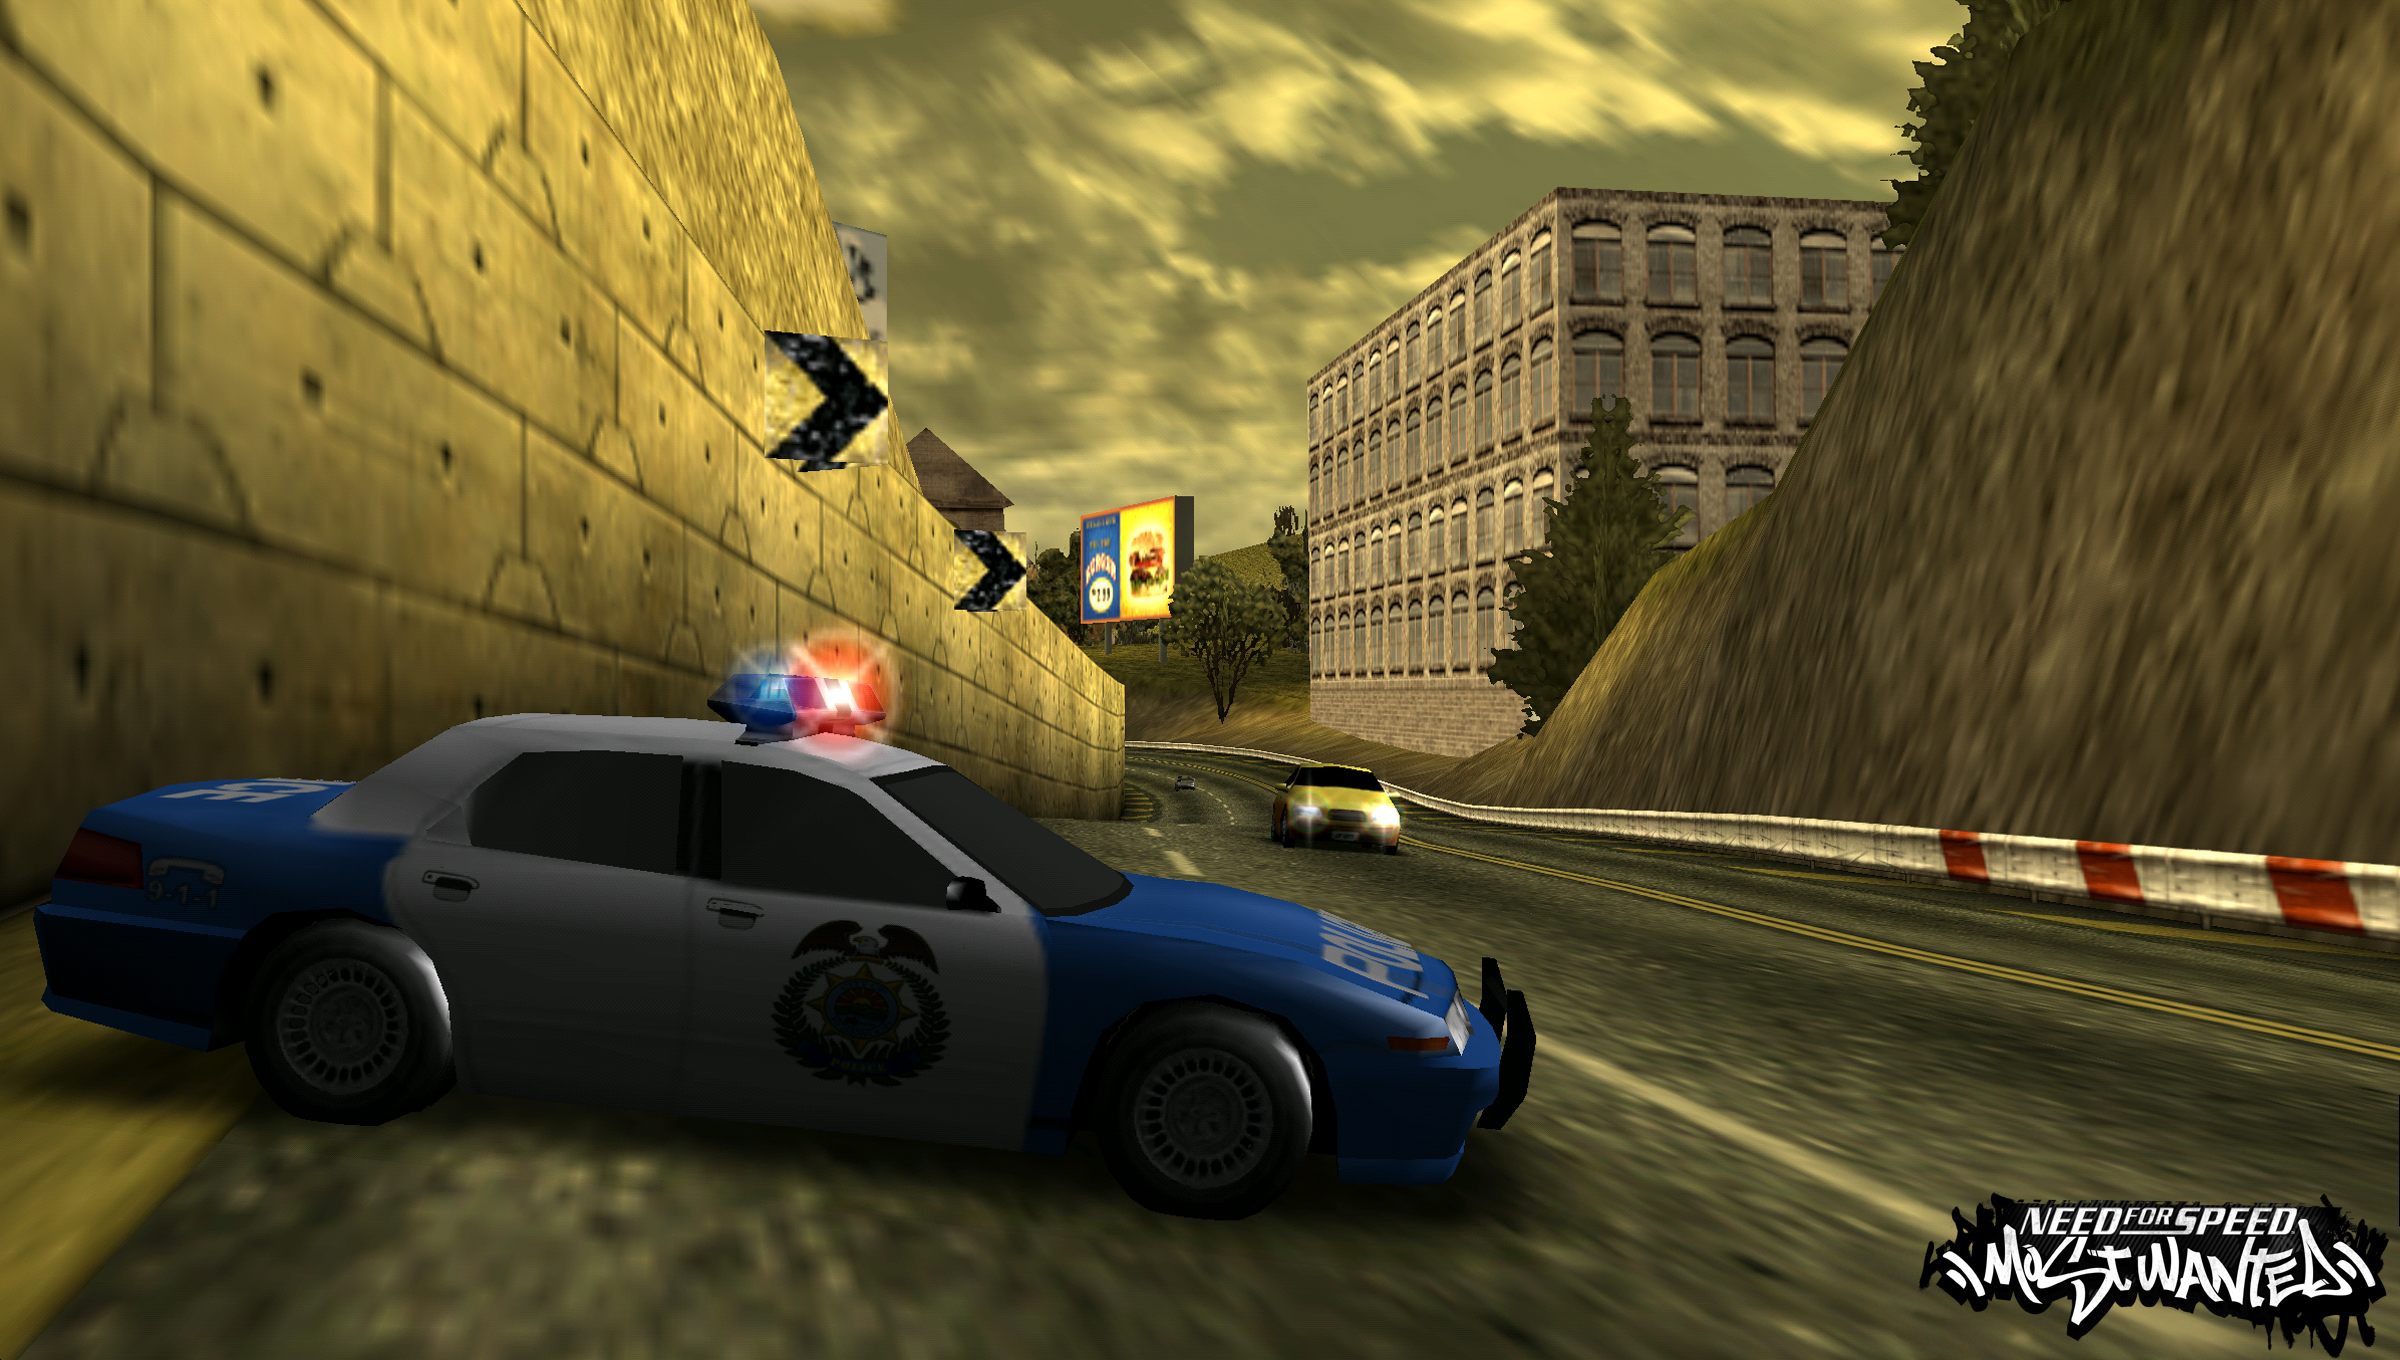 Cheesepolice0. Most wanted 5. 5.1.0 Мост вантед. NFS MW 5-1-0. NFS MW 2005 cop cars.